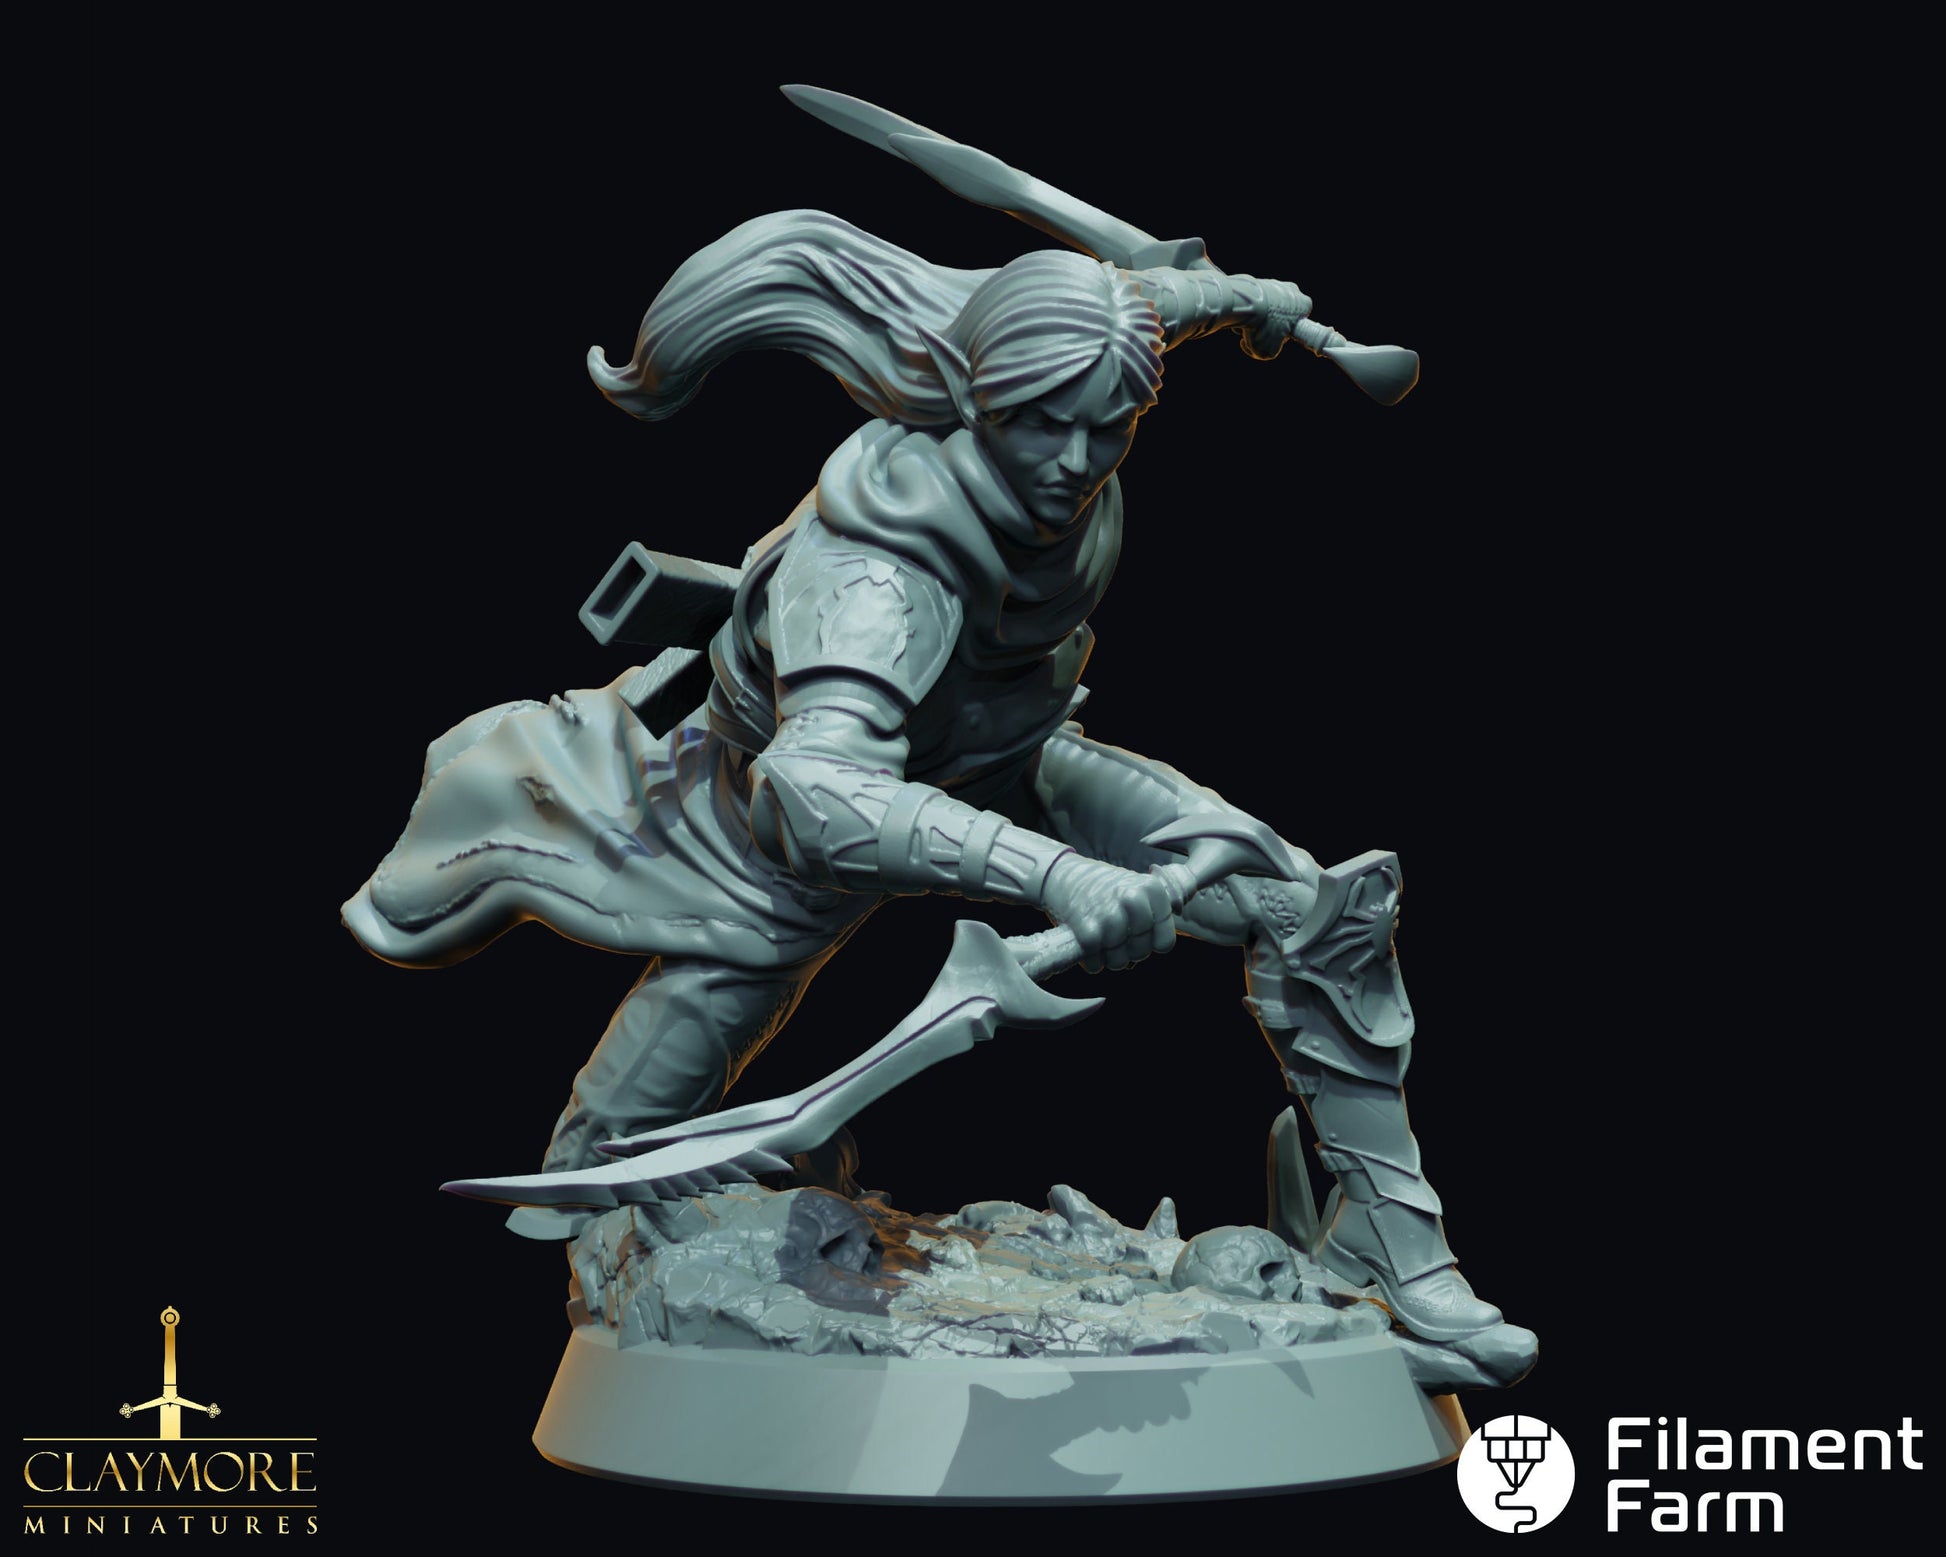 Drow Infiltrator - Dwellers of the Underdark - Highly Detailed Resin 3D Printed Miniature